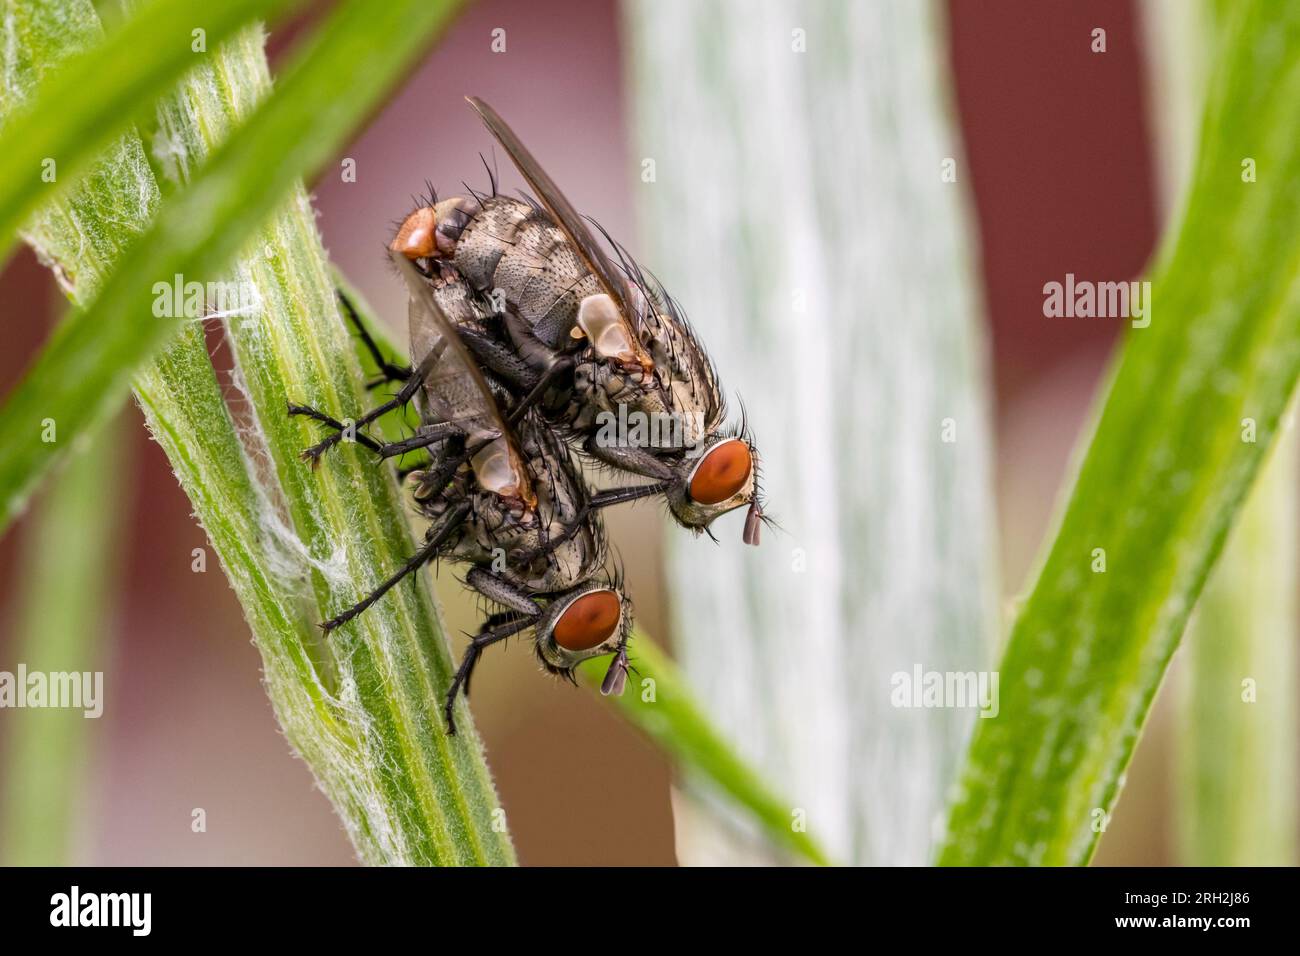 Flesh flies mating on plant. Insect and wildlife conservation, habitat preservation, and pest control concept. Stock Photo